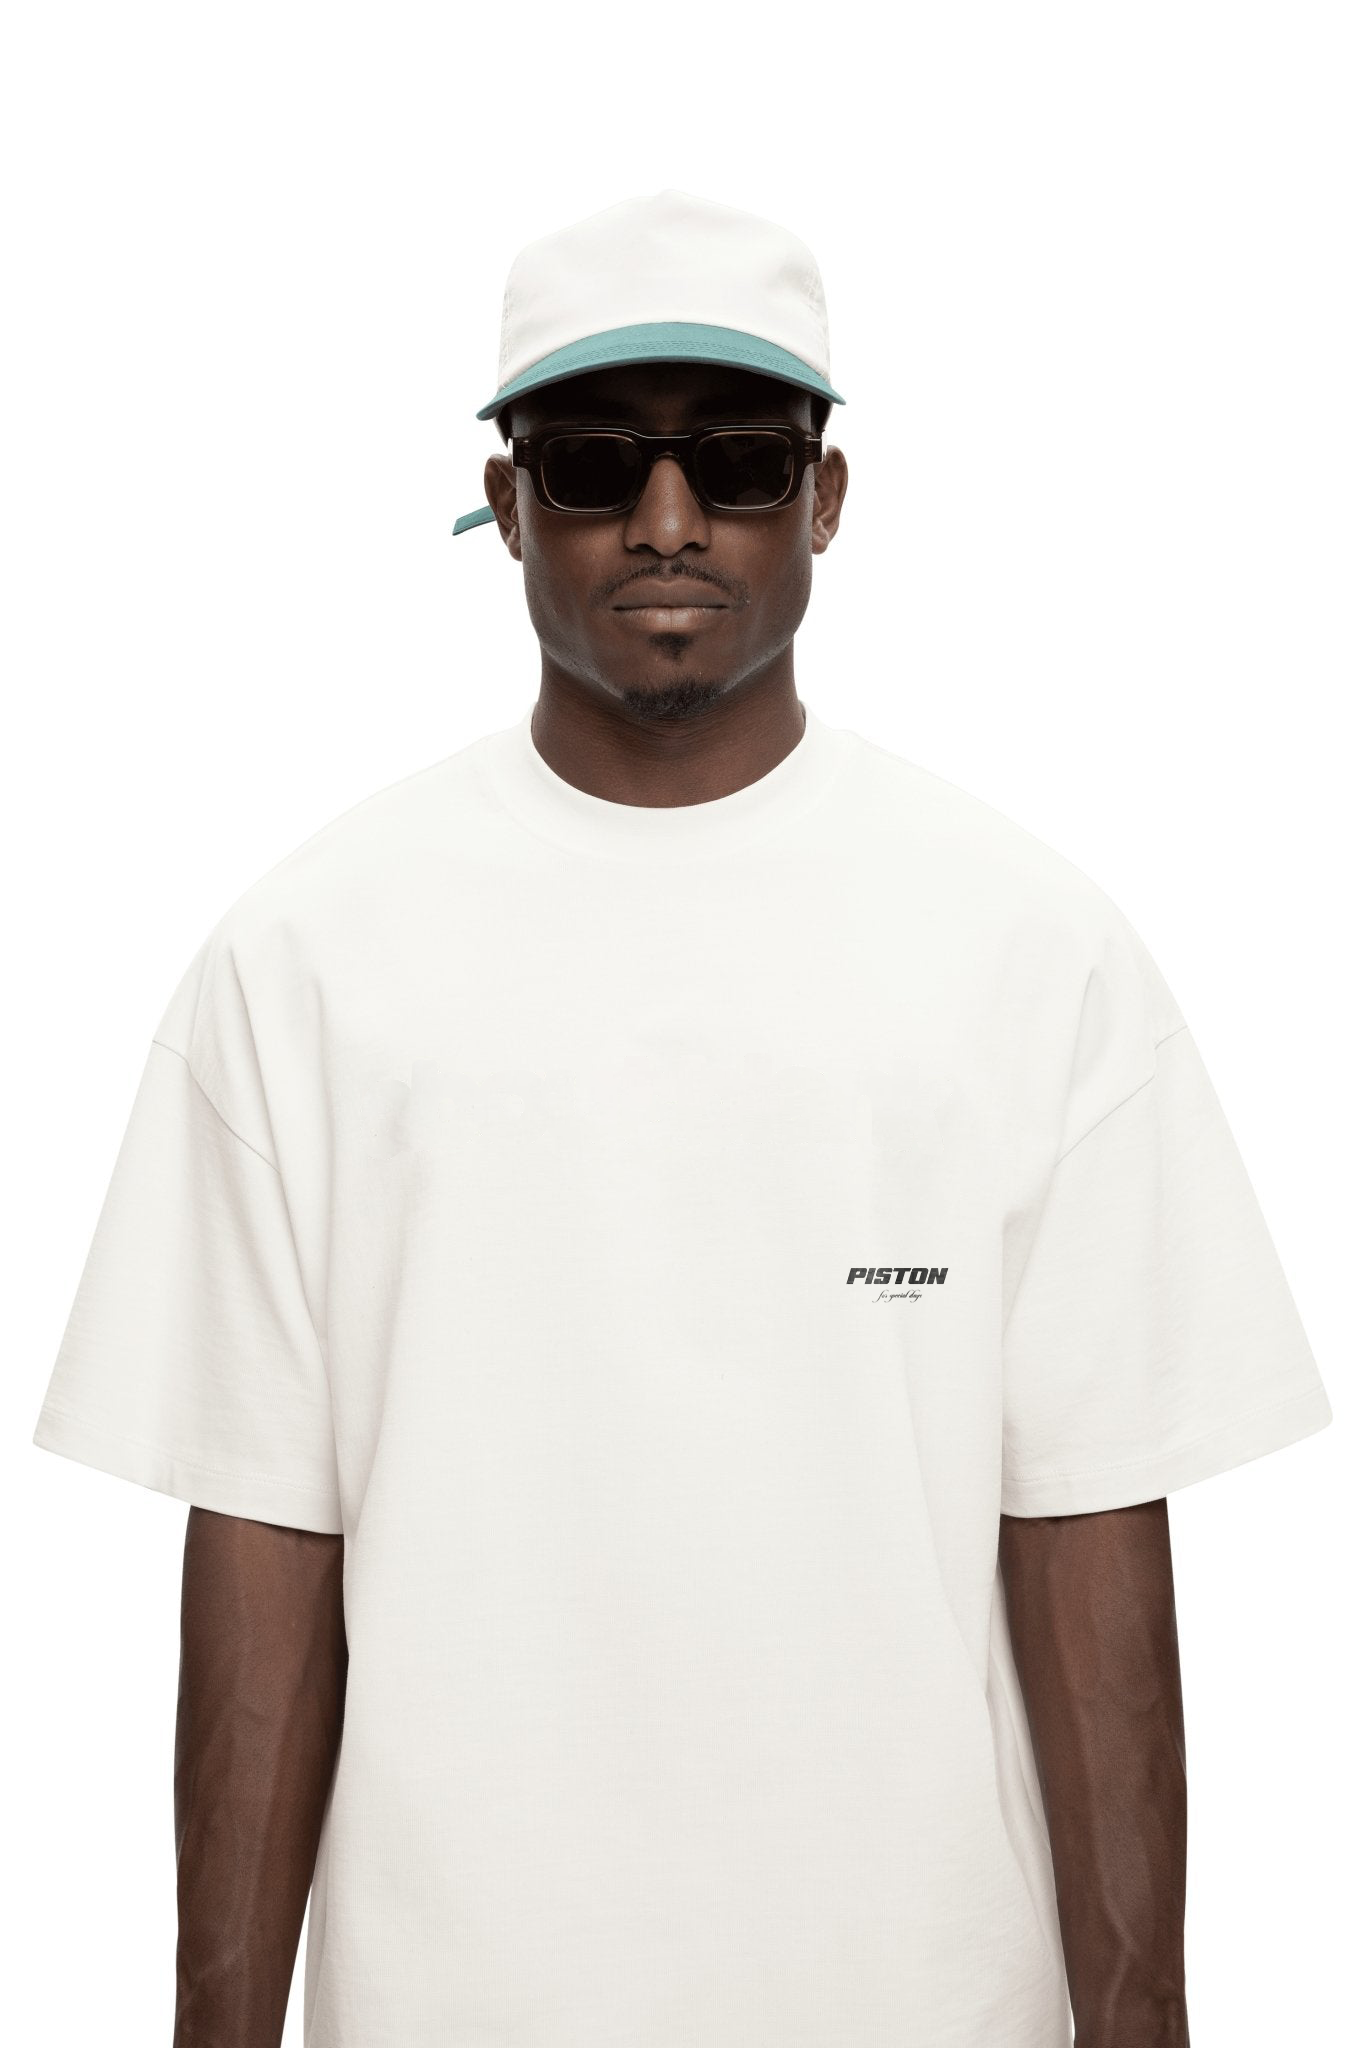 FOR SPECIAL DAYS - T SHIRT WHITE OVERSIZED